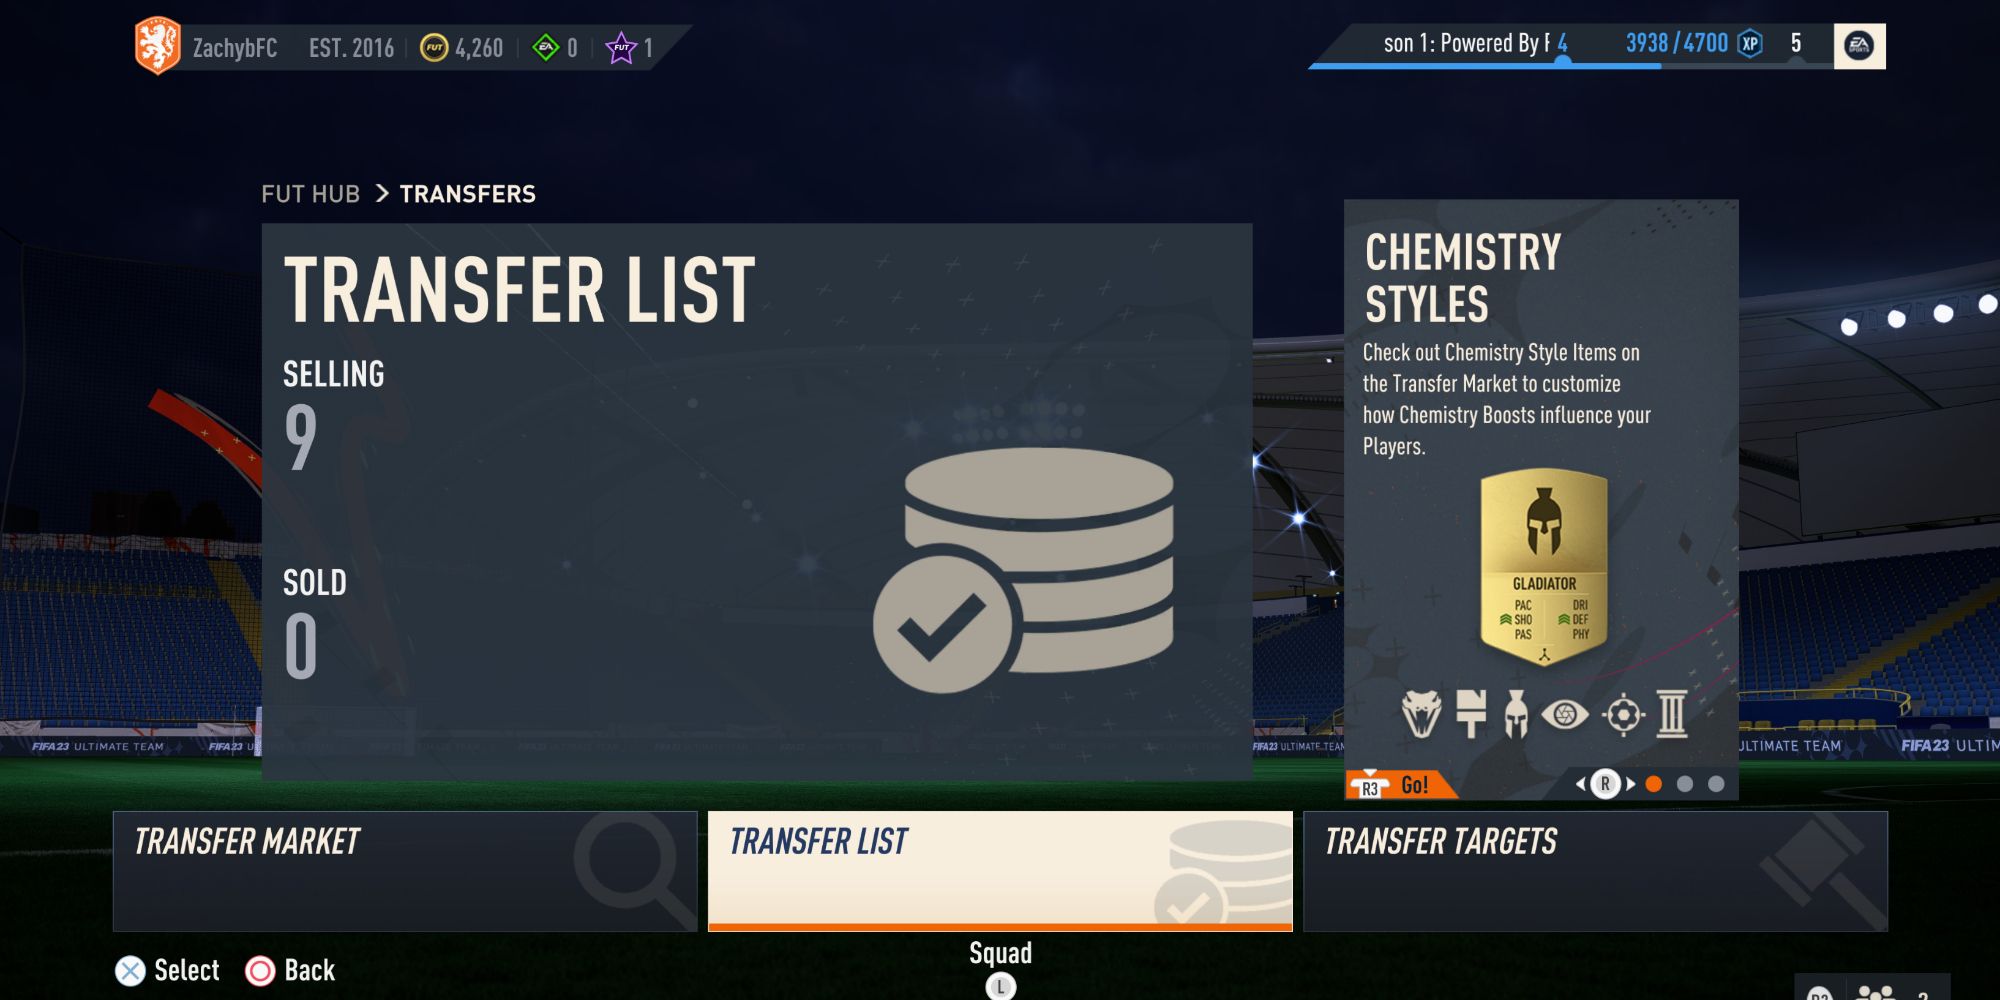 Your Transfer List displayed in the FUT menu of FIFA 23.